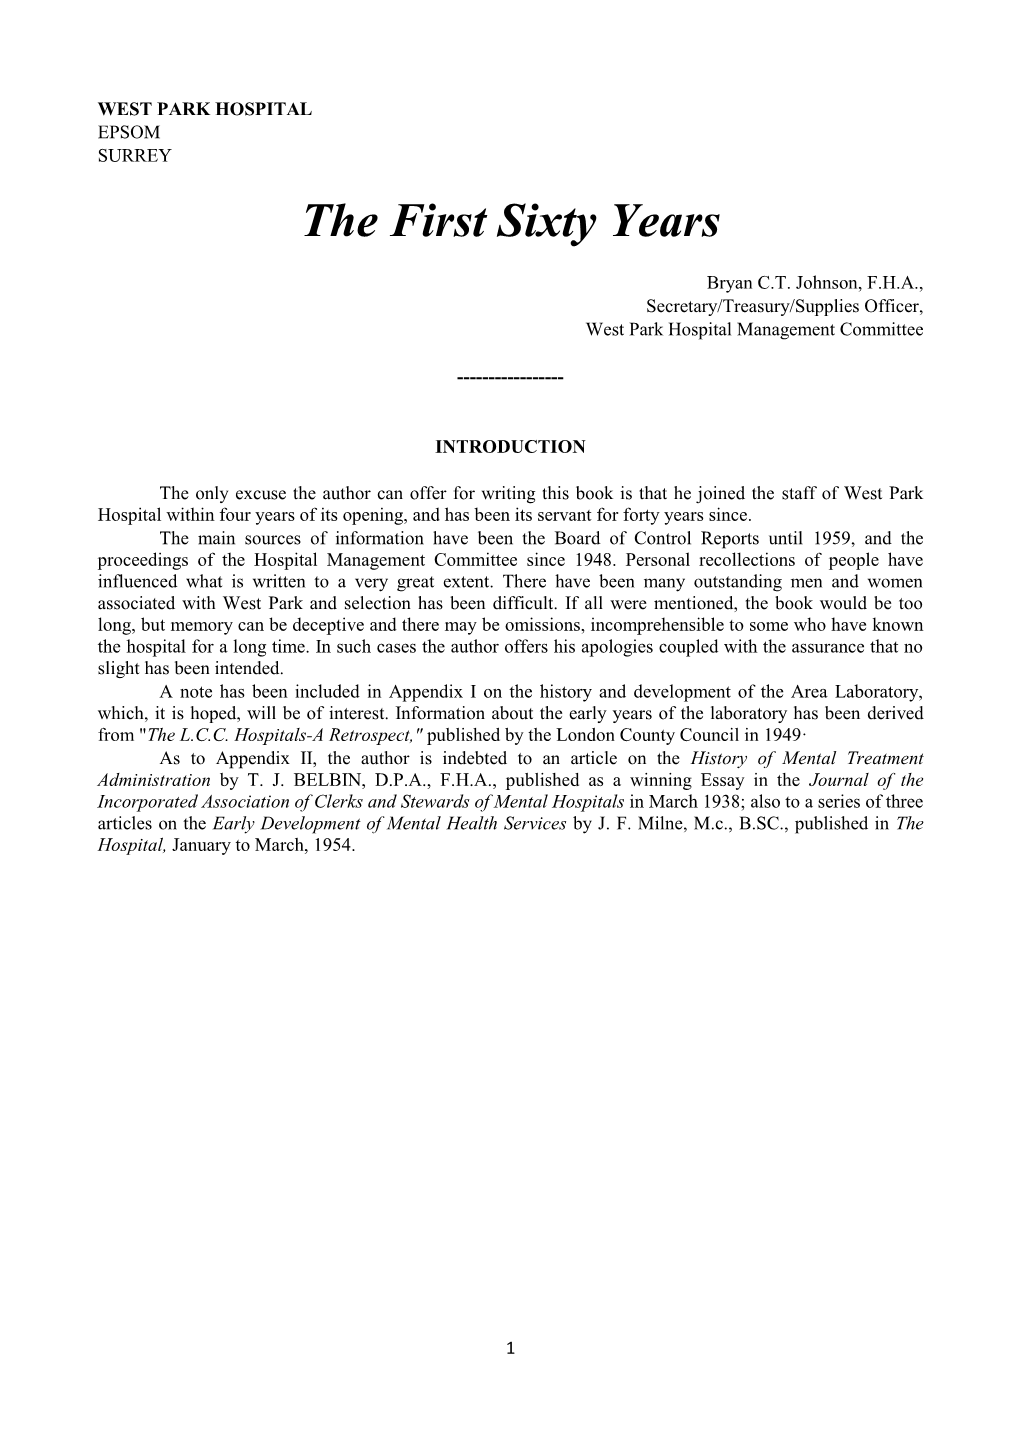 The First Sixty Years